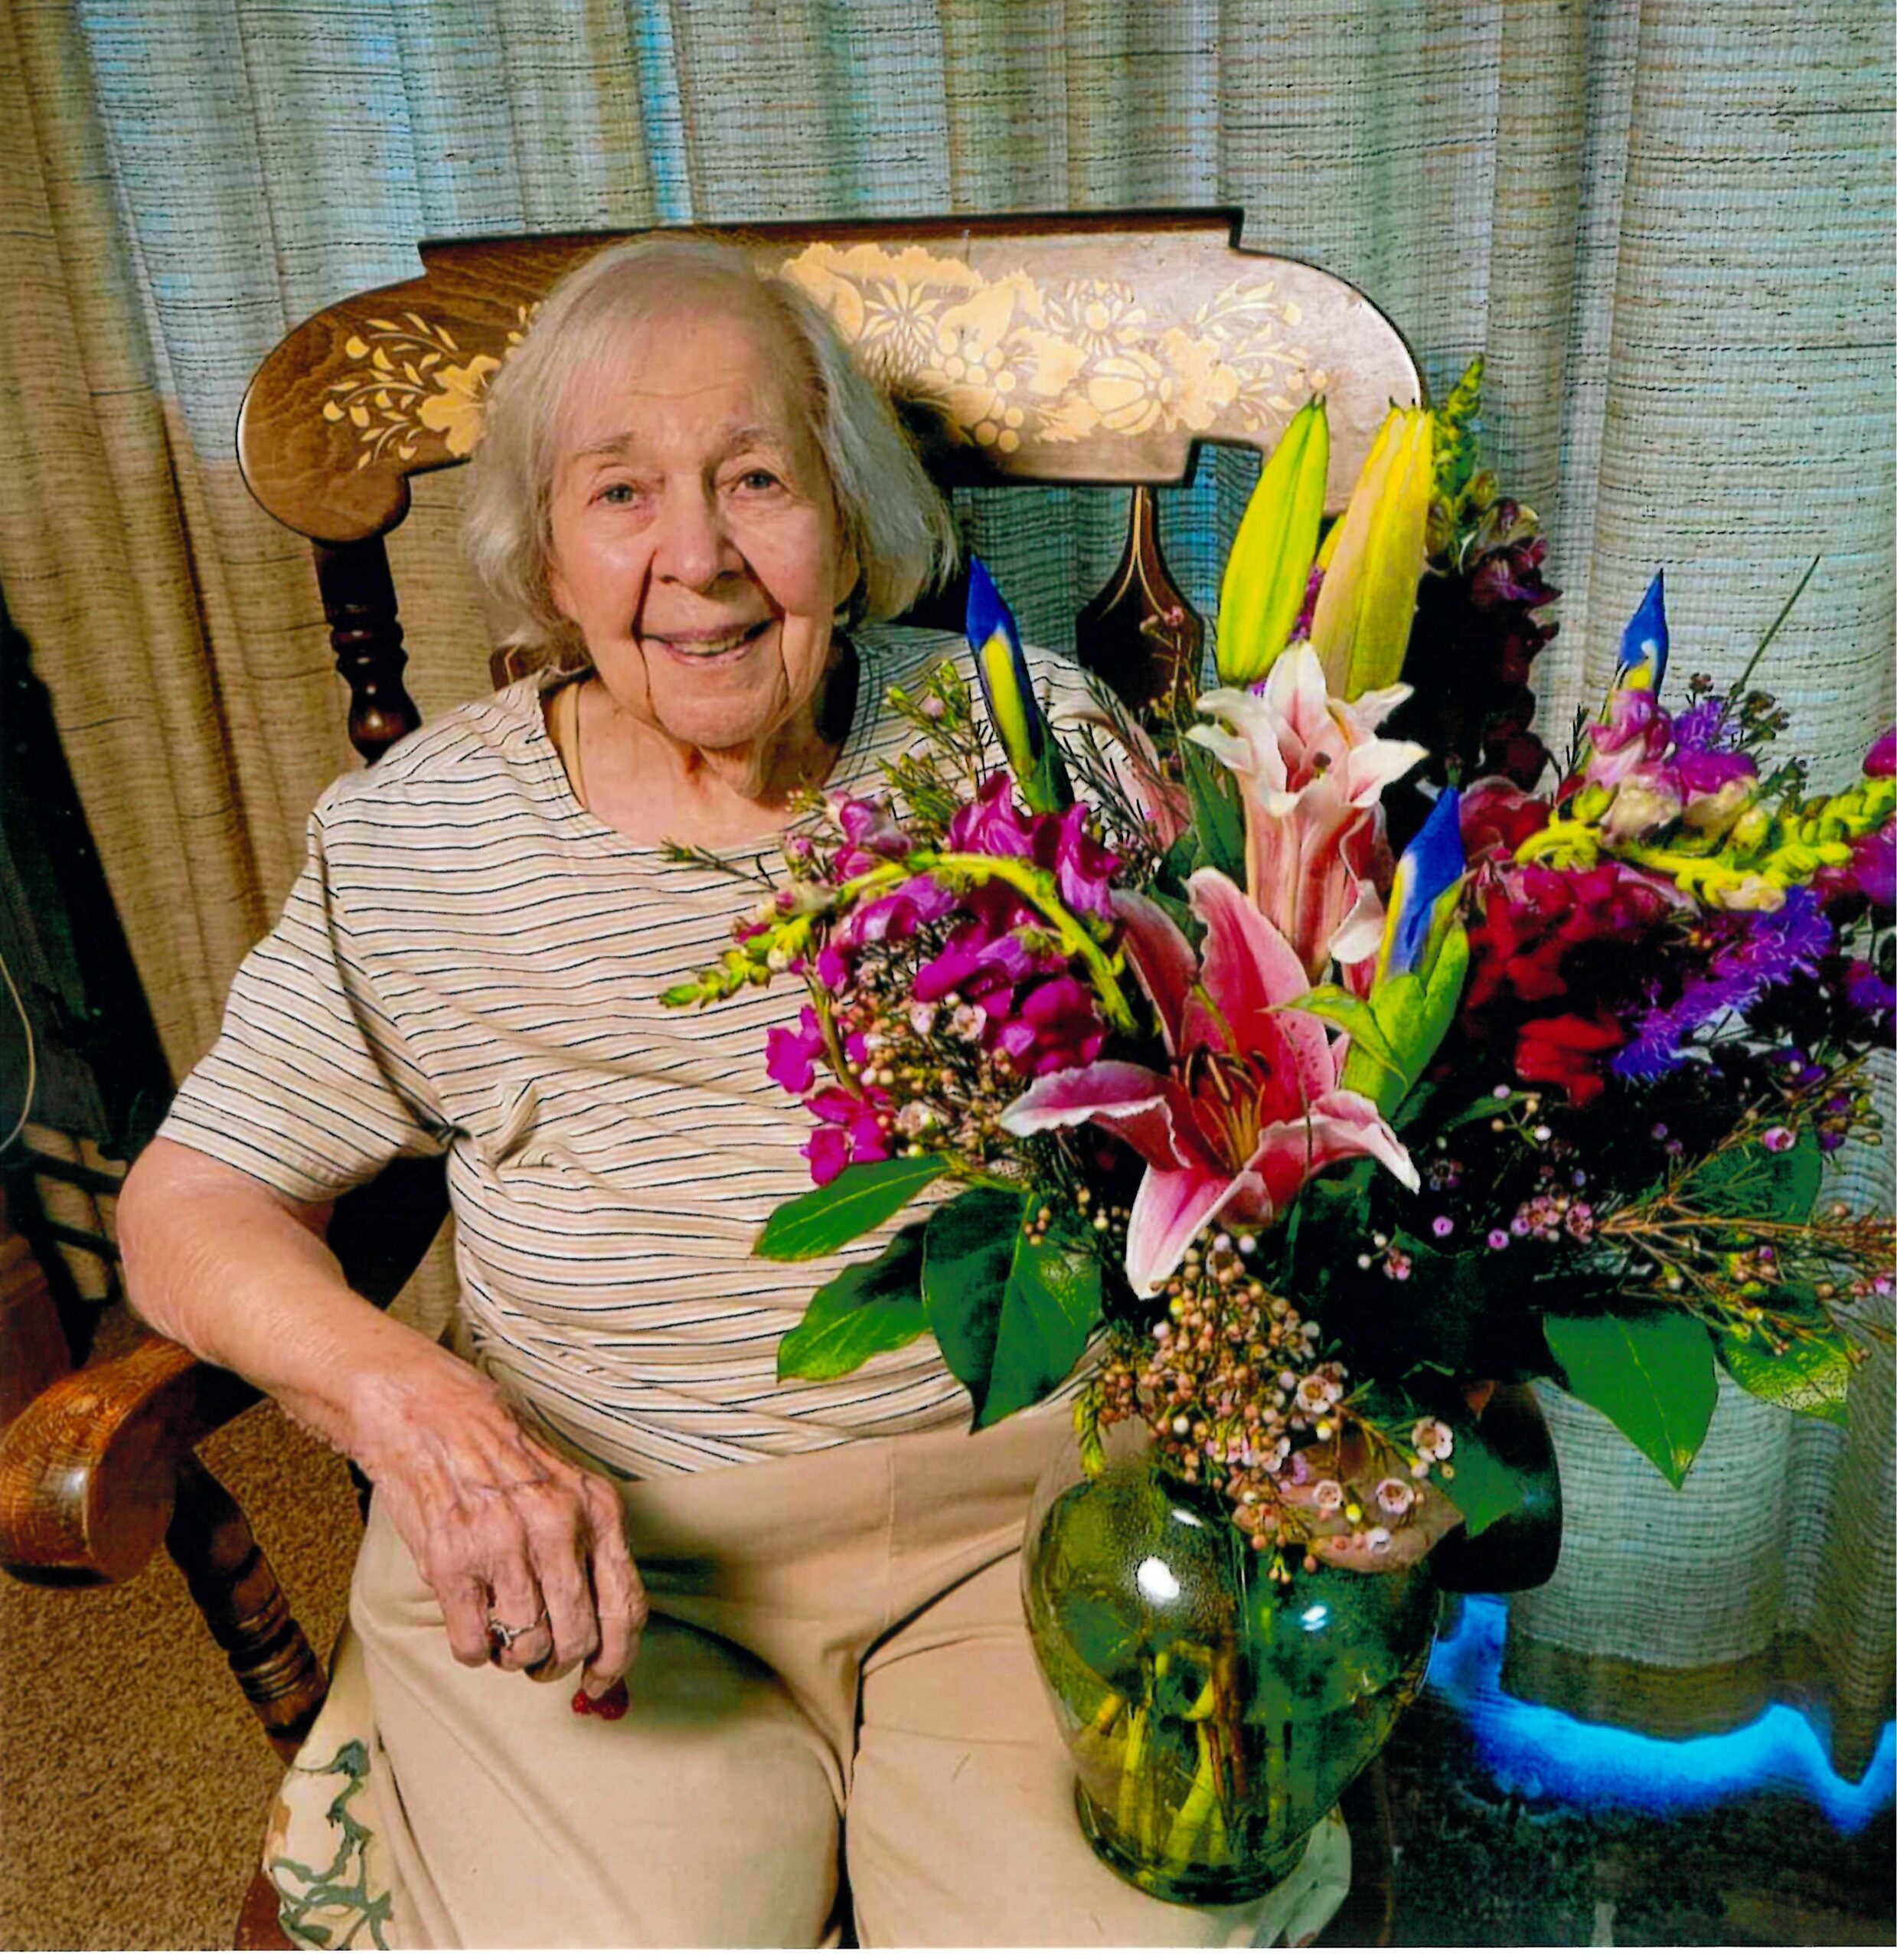 Betty Derick, 97, with a vase of flowers given to her on her birthday